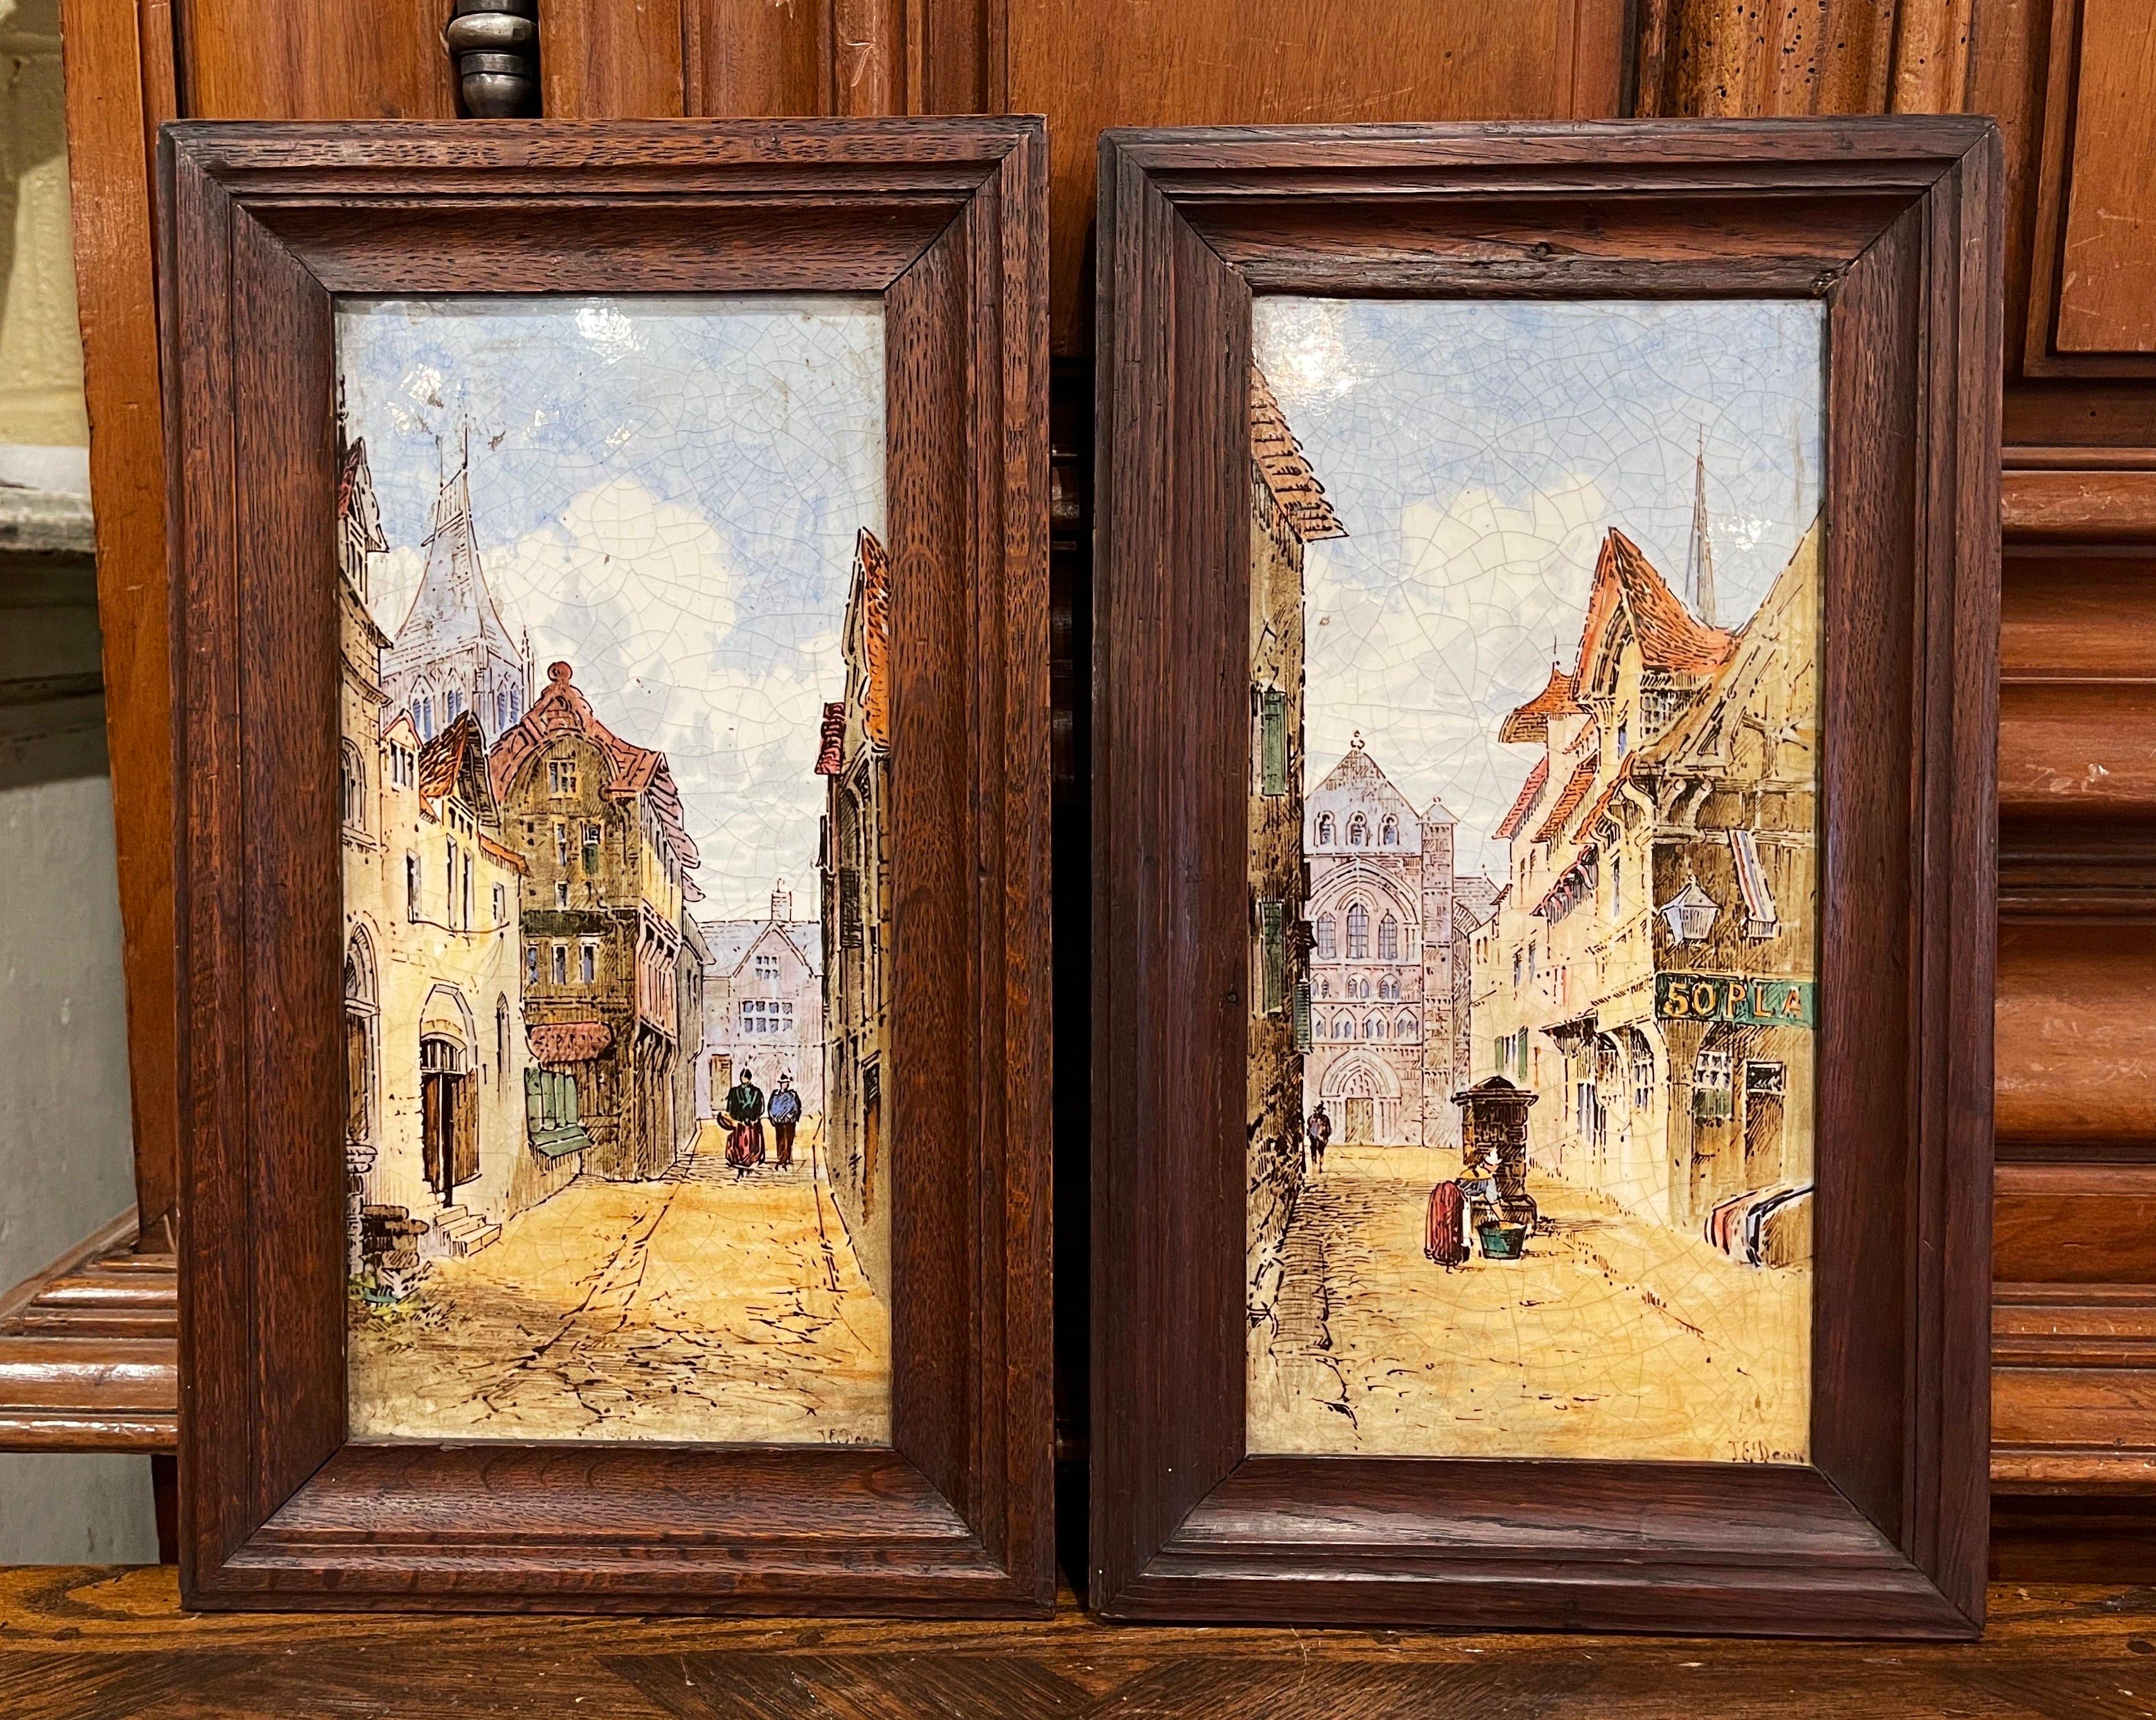 Pair of 19th Century English Minton Framed Painted Ceramic Wall Plaques In Excellent Condition For Sale In Dallas, TX